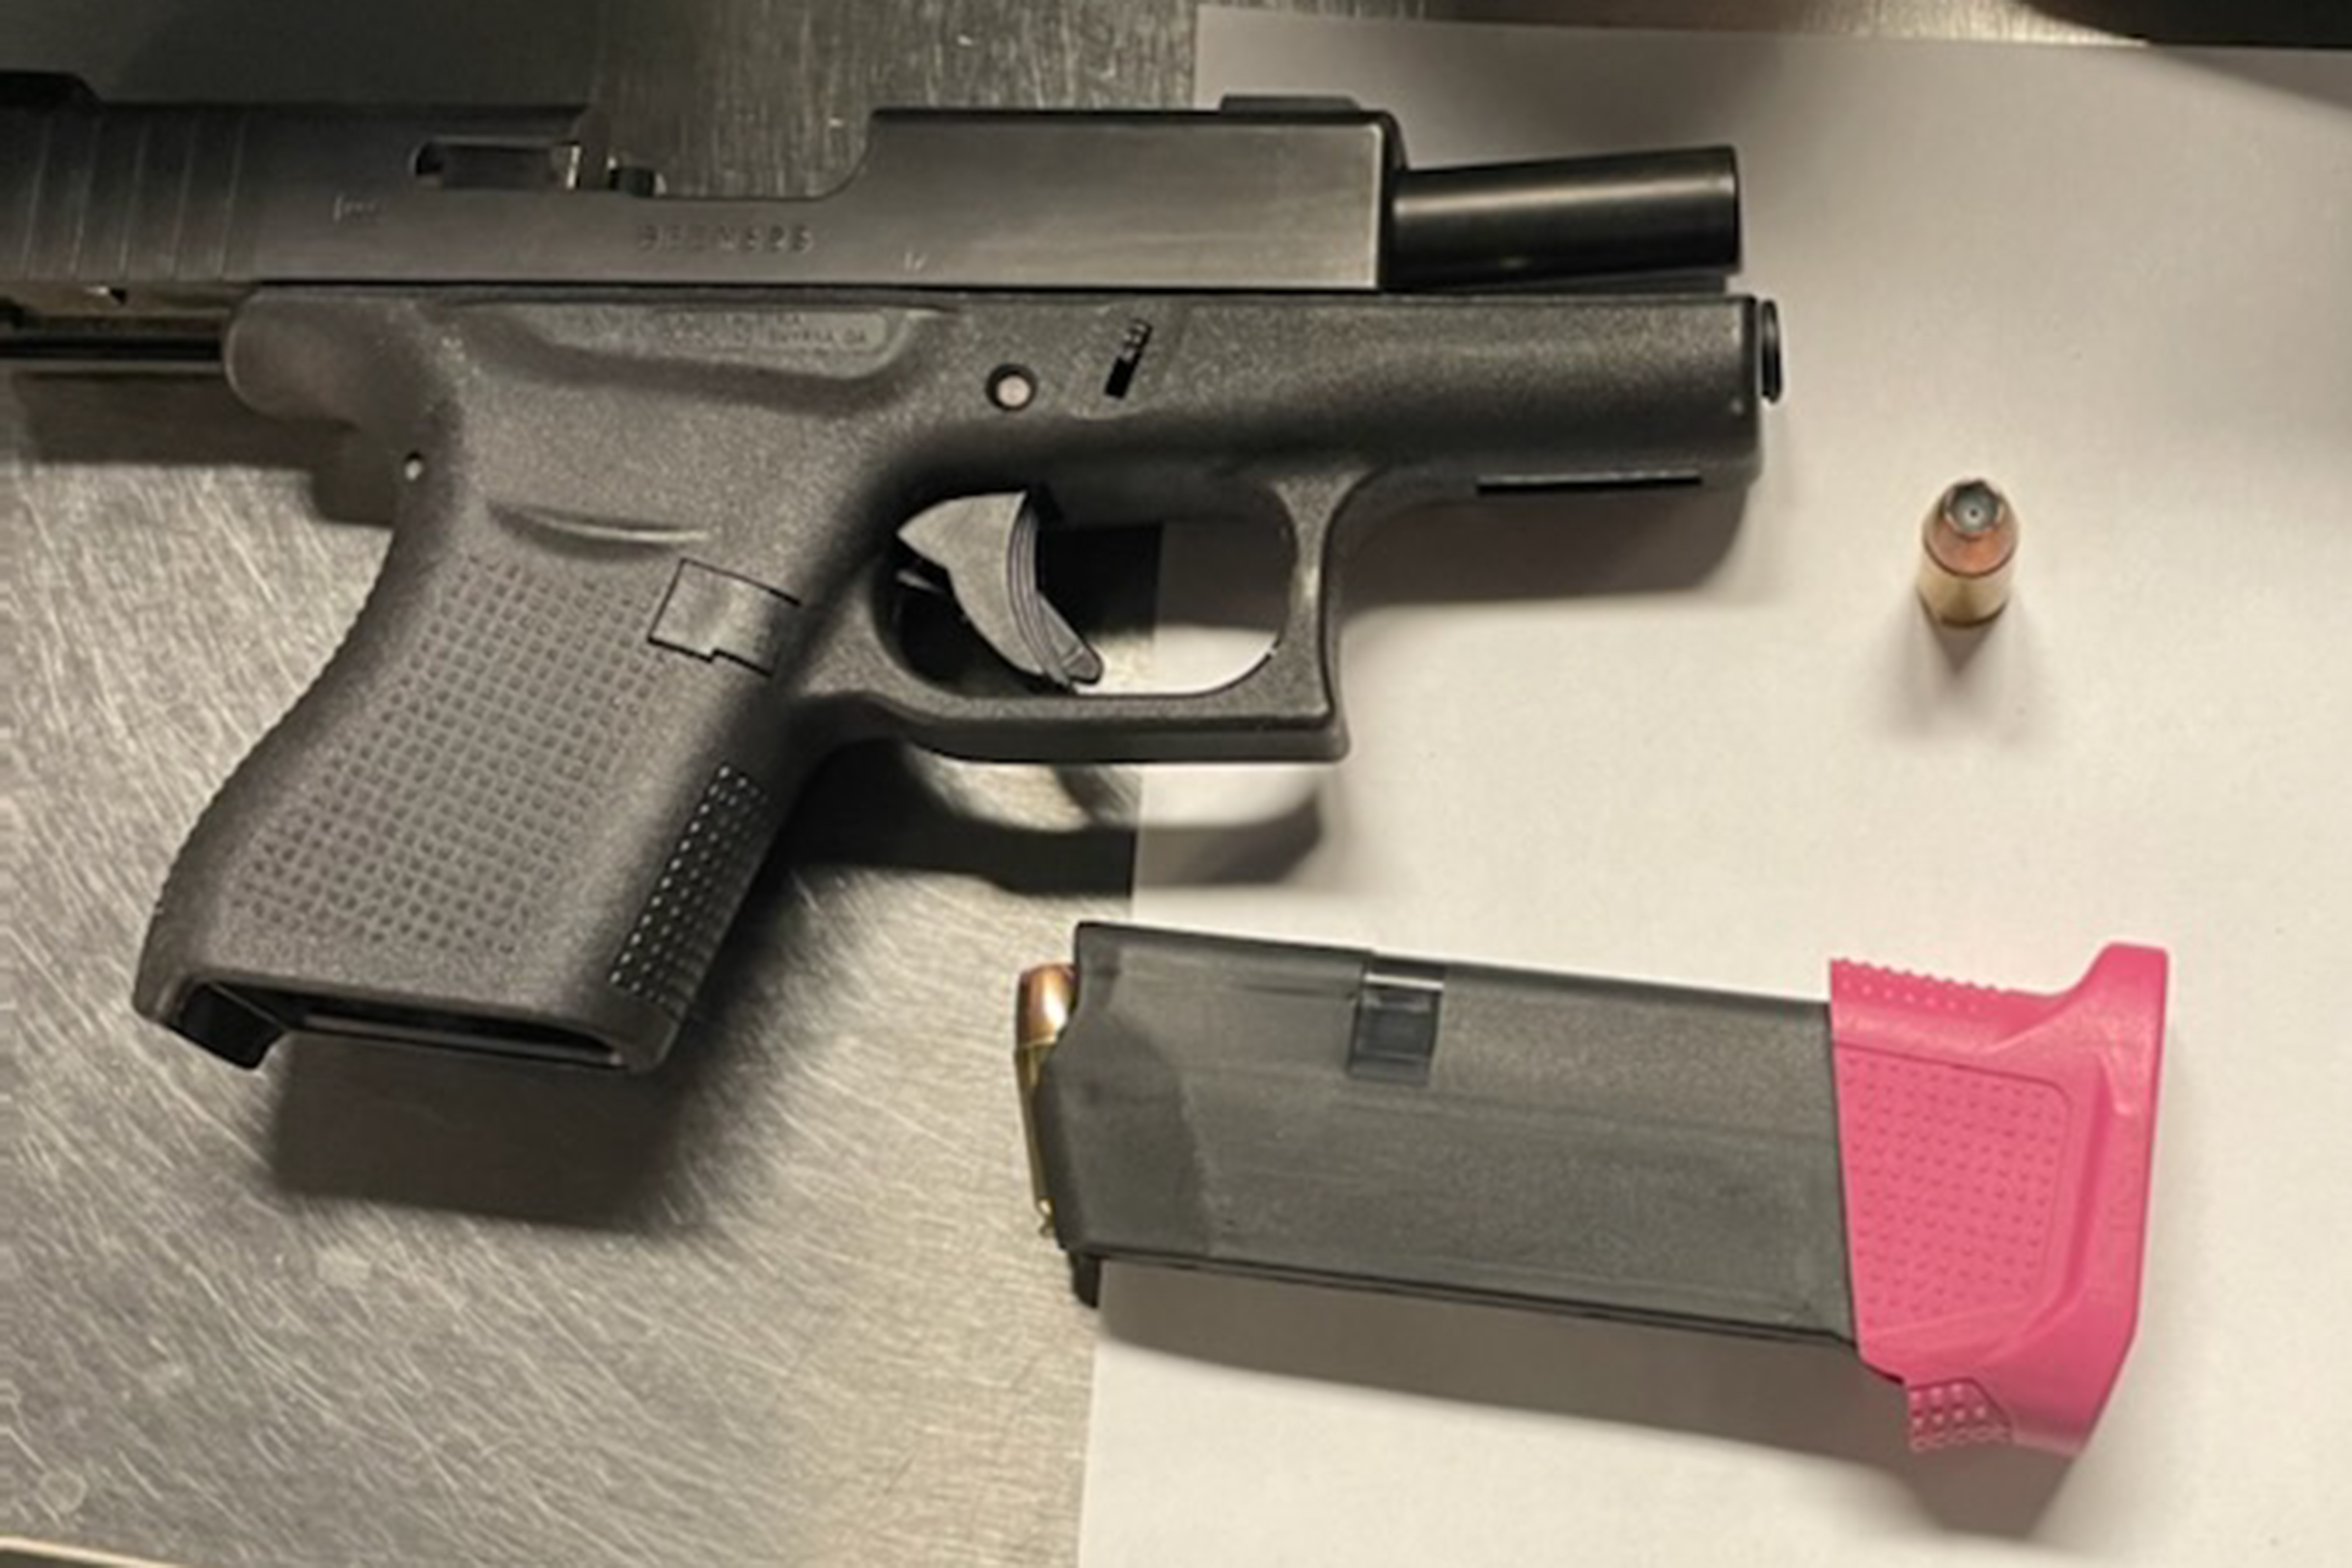 TSA officers prevented a man from carrying this loaded gun onto his flight at Pittsburgh International Airport on Saturday, Oct. 15. (TSA photo)